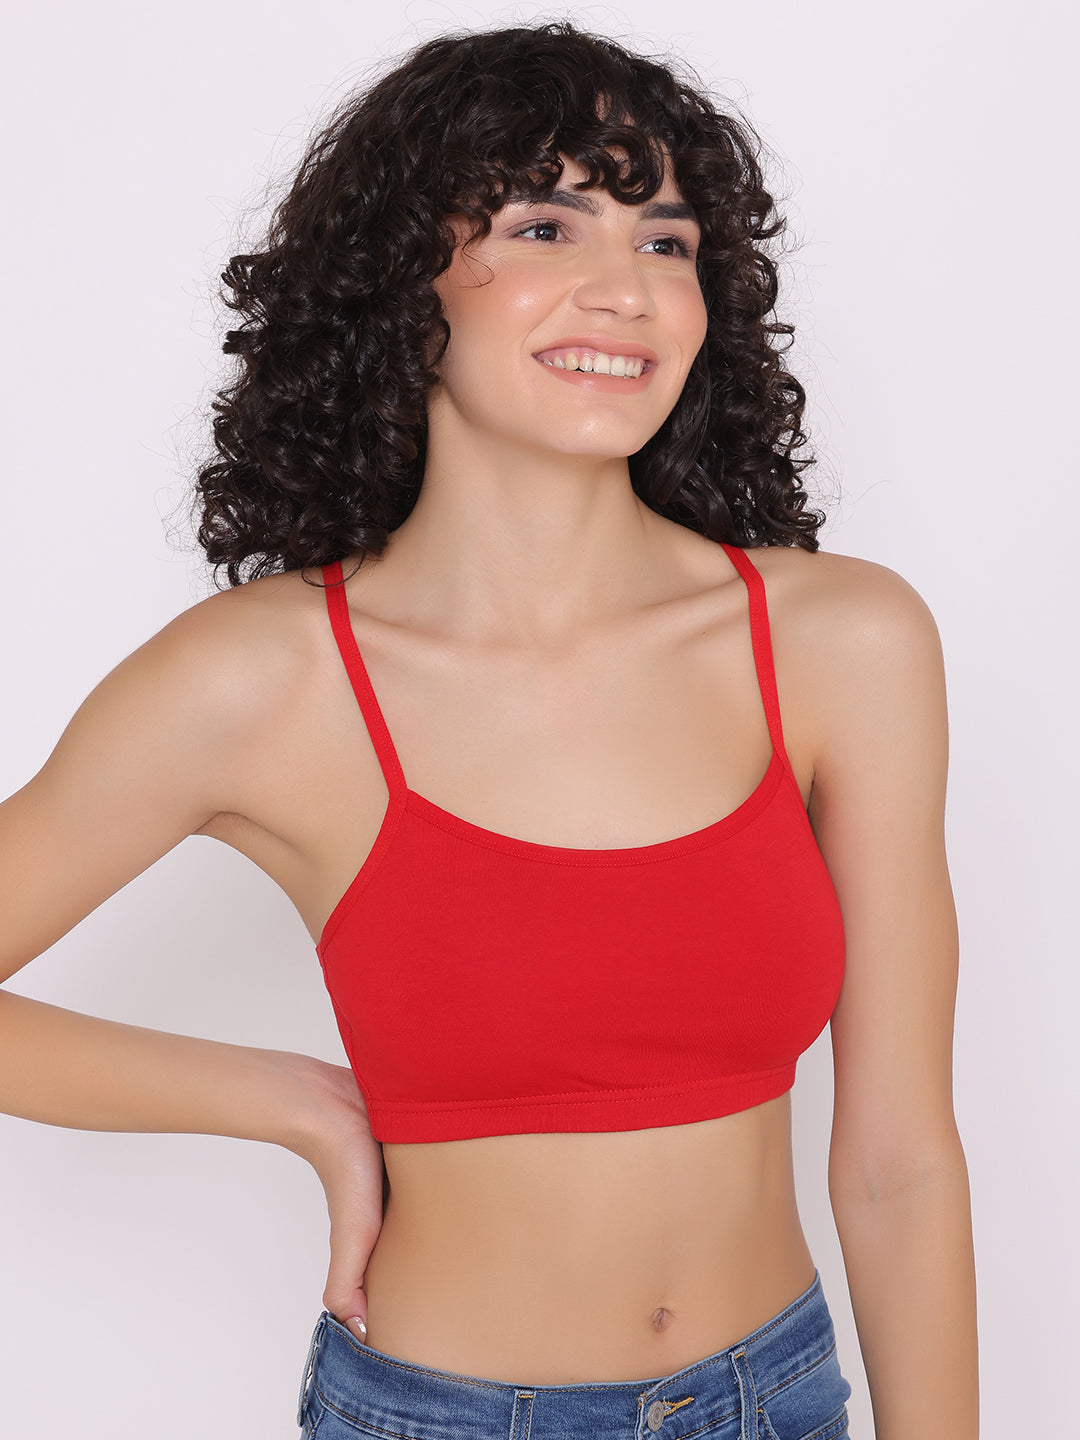 Teenager cotton Seamless bra for women's in different sizes and